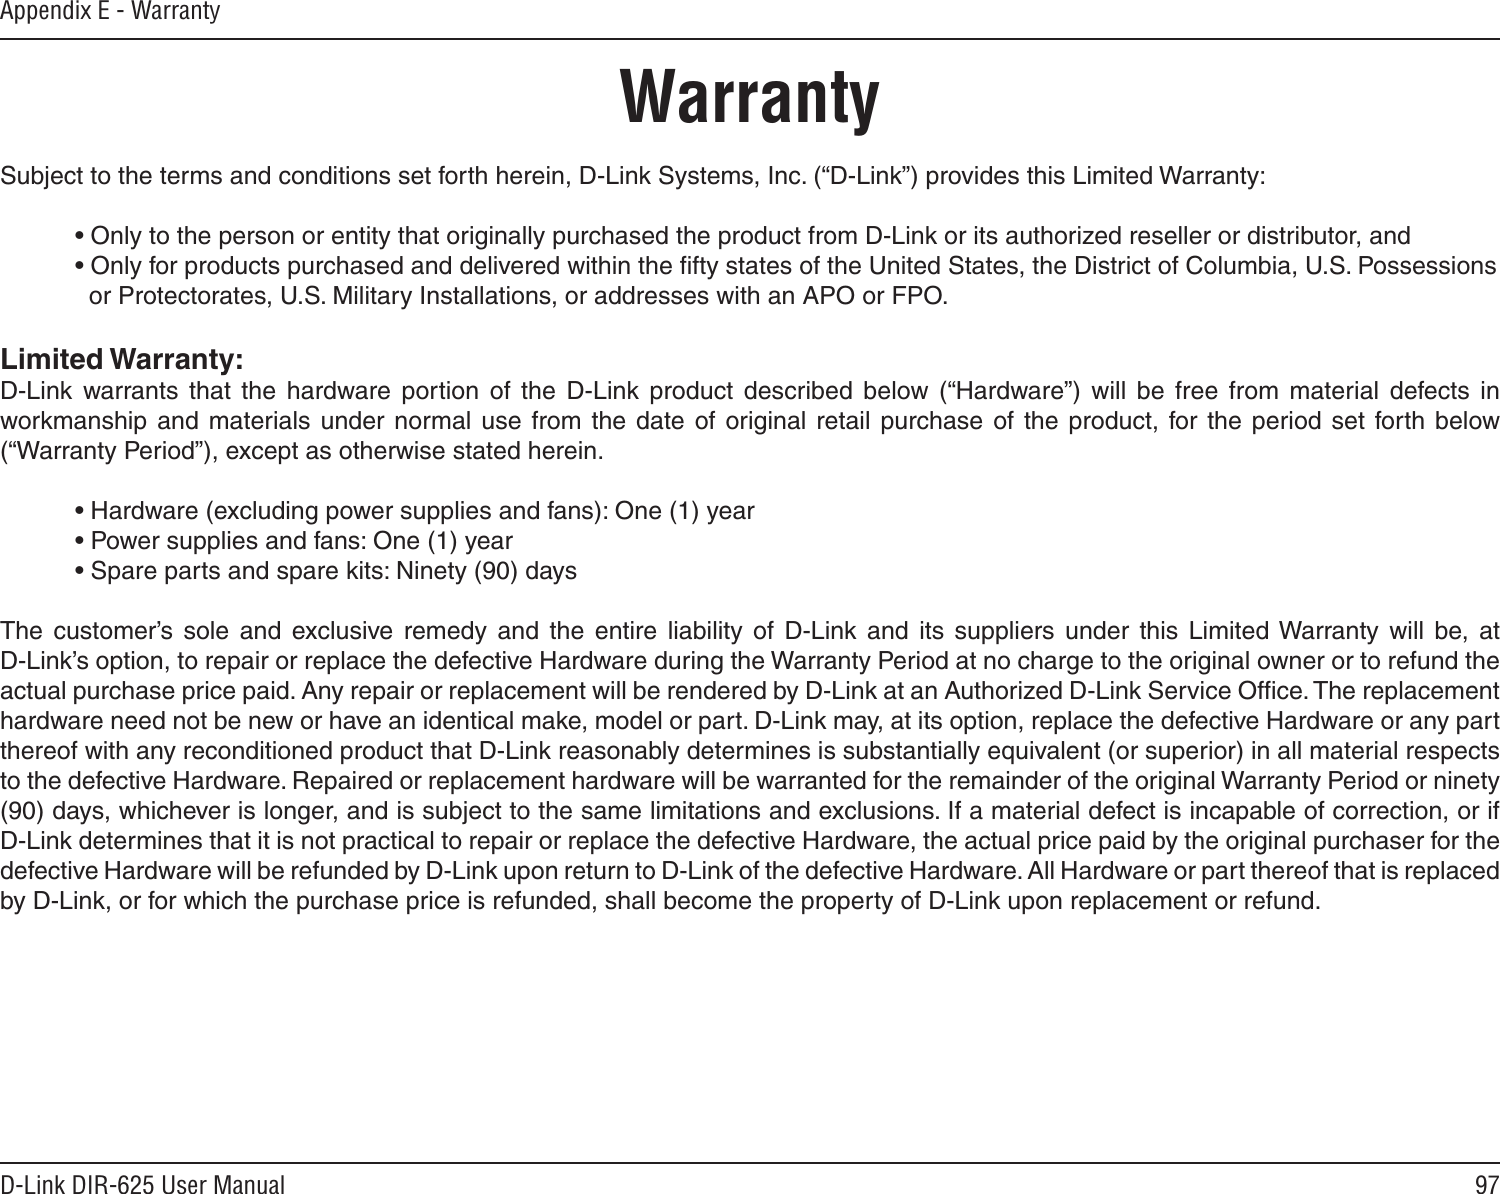 97D-Link DIR-625 User ManualAppendix E - WarrantyWarrantySubject to the terms and conditions set forth herein, D-Link Systems, Inc. (“D-Link”) provides this Limited Warranty:  • Only to the person or entity that originally purchased the product from D-Link or its authorized reseller or distributor, and  • Only for products purchased and delivered within the ﬁfty states of the United States, the District of Columbia, U.S. Possessions      or Protectorates, U.S. Military Installations, or addresses with an APO or FPO.Limited Warranty:D-Link  warrants that  the  hardware  portion  of  the  D-Link  product  described  below  (“Hardware”)  will  be  free  from  material  defects  in workmanship  and  materials  under  normal use  from  the date  of  original  retail  purchase  of  the product,  for the  period  set  forth  below (“Warranty Period”), except as otherwise stated herein.  • Hardware (excluding power supplies and fans): One (1) year  • Power supplies and fans: One (1) year  • Spare parts and spare kits: Ninety (90) daysThe  customer’s  sole  and  exclusive  remedy  and  the  entire  liability  of  D-Link  and  its  suppliers  under  this  Limited Warranty  will  be,  at  D-Link’s option, to repair or replace the defective Hardware during the Warranty Period at no charge to the original owner or to refund the actual purchase price paid. Any repair or replacement will be rendered by D-Link at an Authorized D-Link Service Ofﬁce. The replacement hardware need not be new or have an identical make, model or part. D-Link may, at its option, replace the defective Hardware or any part thereof with any reconditioned product that D-Link reasonably determines is substantially equivalent (or superior) in all material respects to the defective Hardware. Repaired or replacement hardware will be warranted for the remainder of the original Warranty Period or ninety (90) days, whichever is longer, and is subject to the same limitations and exclusions. If a material defect is incapable of correction, or if D-Link determines that it is not practical to repair or replace the defective Hardware, the actual price paid by the original purchaser for the defective Hardware will be refunded by D-Link upon return to D-Link of the defective Hardware. All Hardware or part thereof that is replaced by D-Link, or for which the purchase price is refunded, shall become the property of D-Link upon replacement or refund.